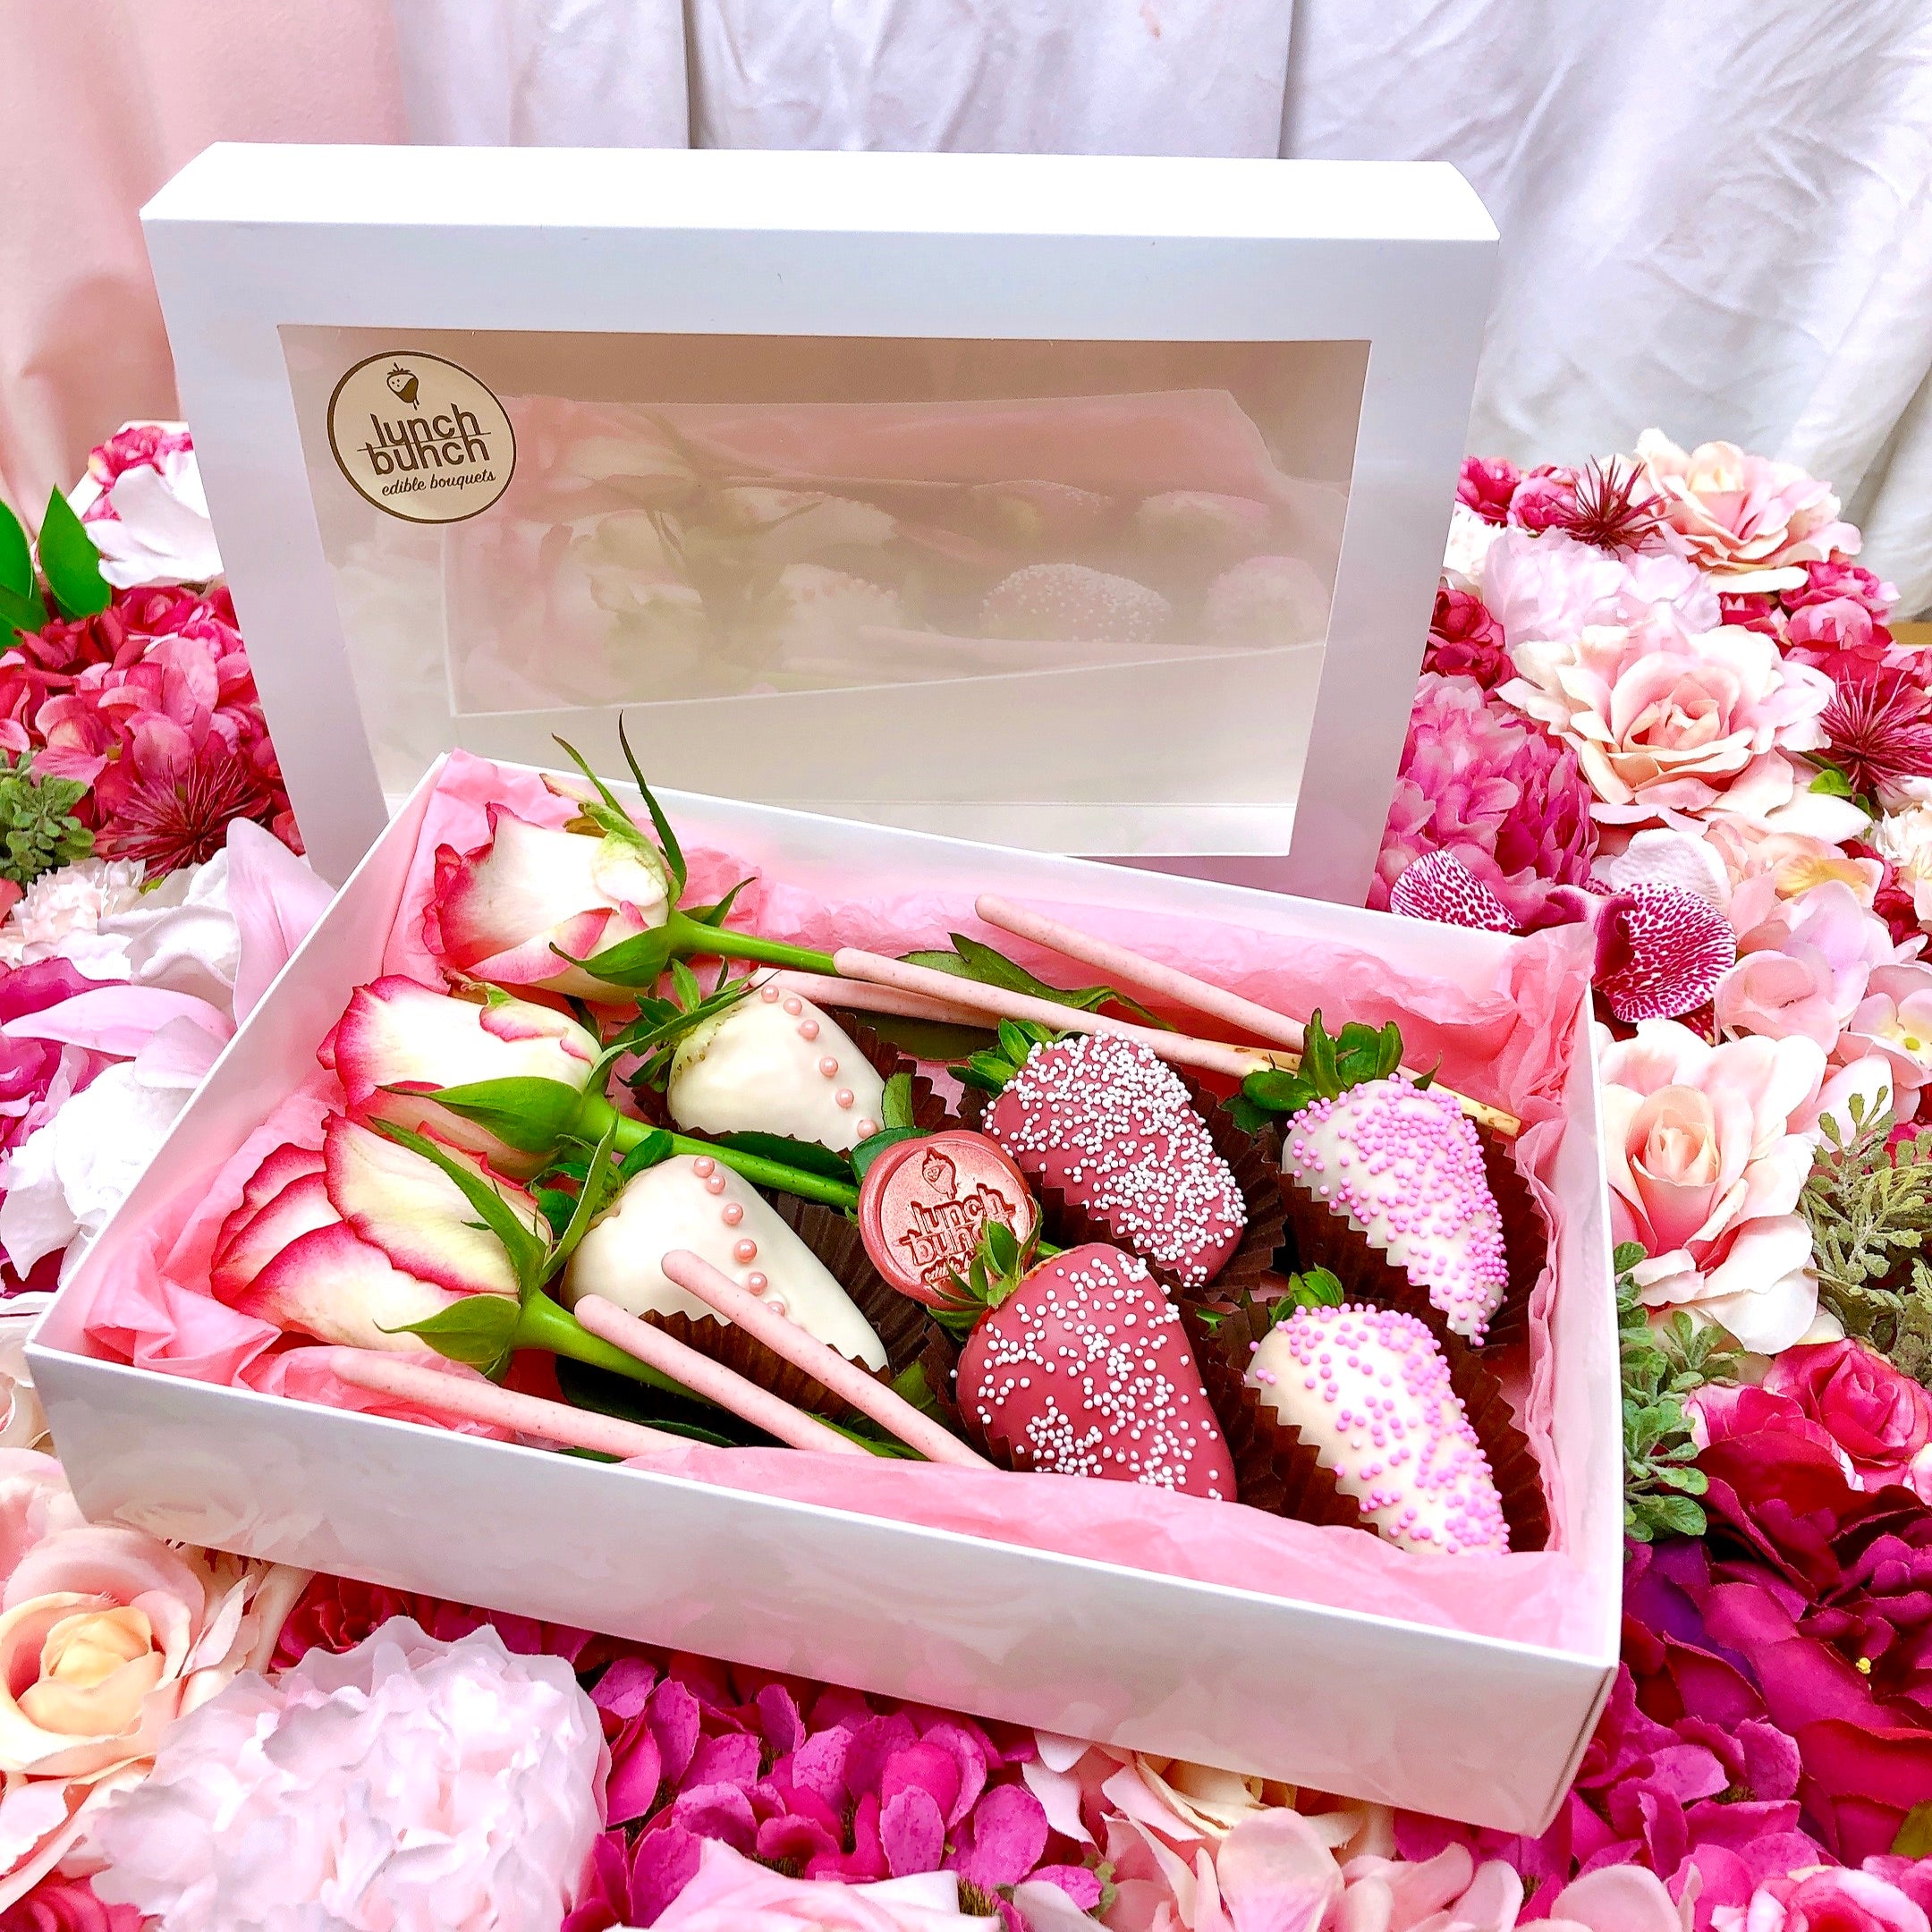 Personalise chocolate covered strawberries and flowers in a small gift box available for same day delivery chocolate Adelaide